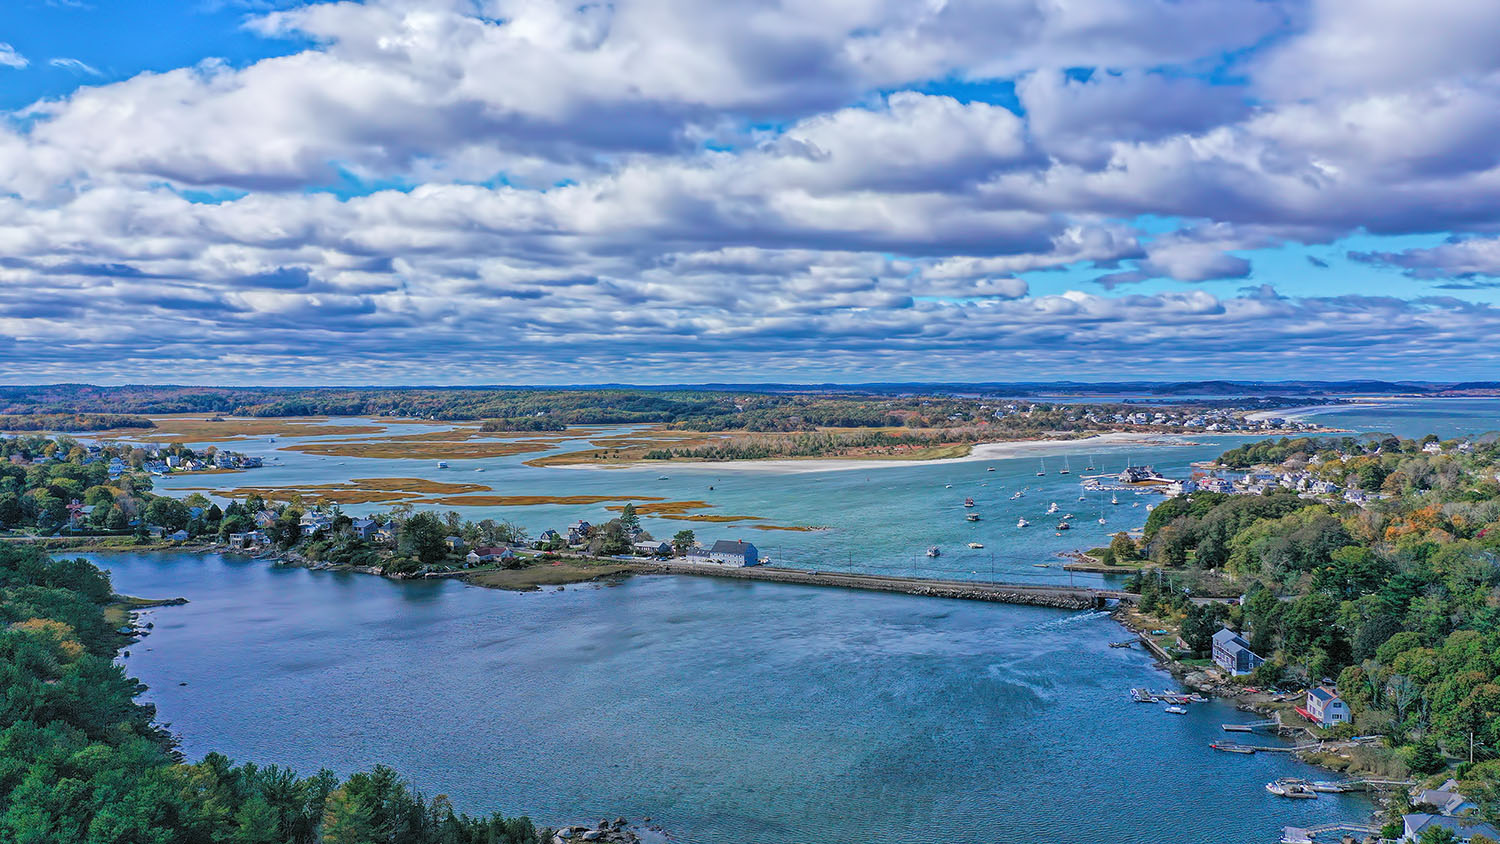 Visit Cape Ann, MA in the off-season for your flexcation.